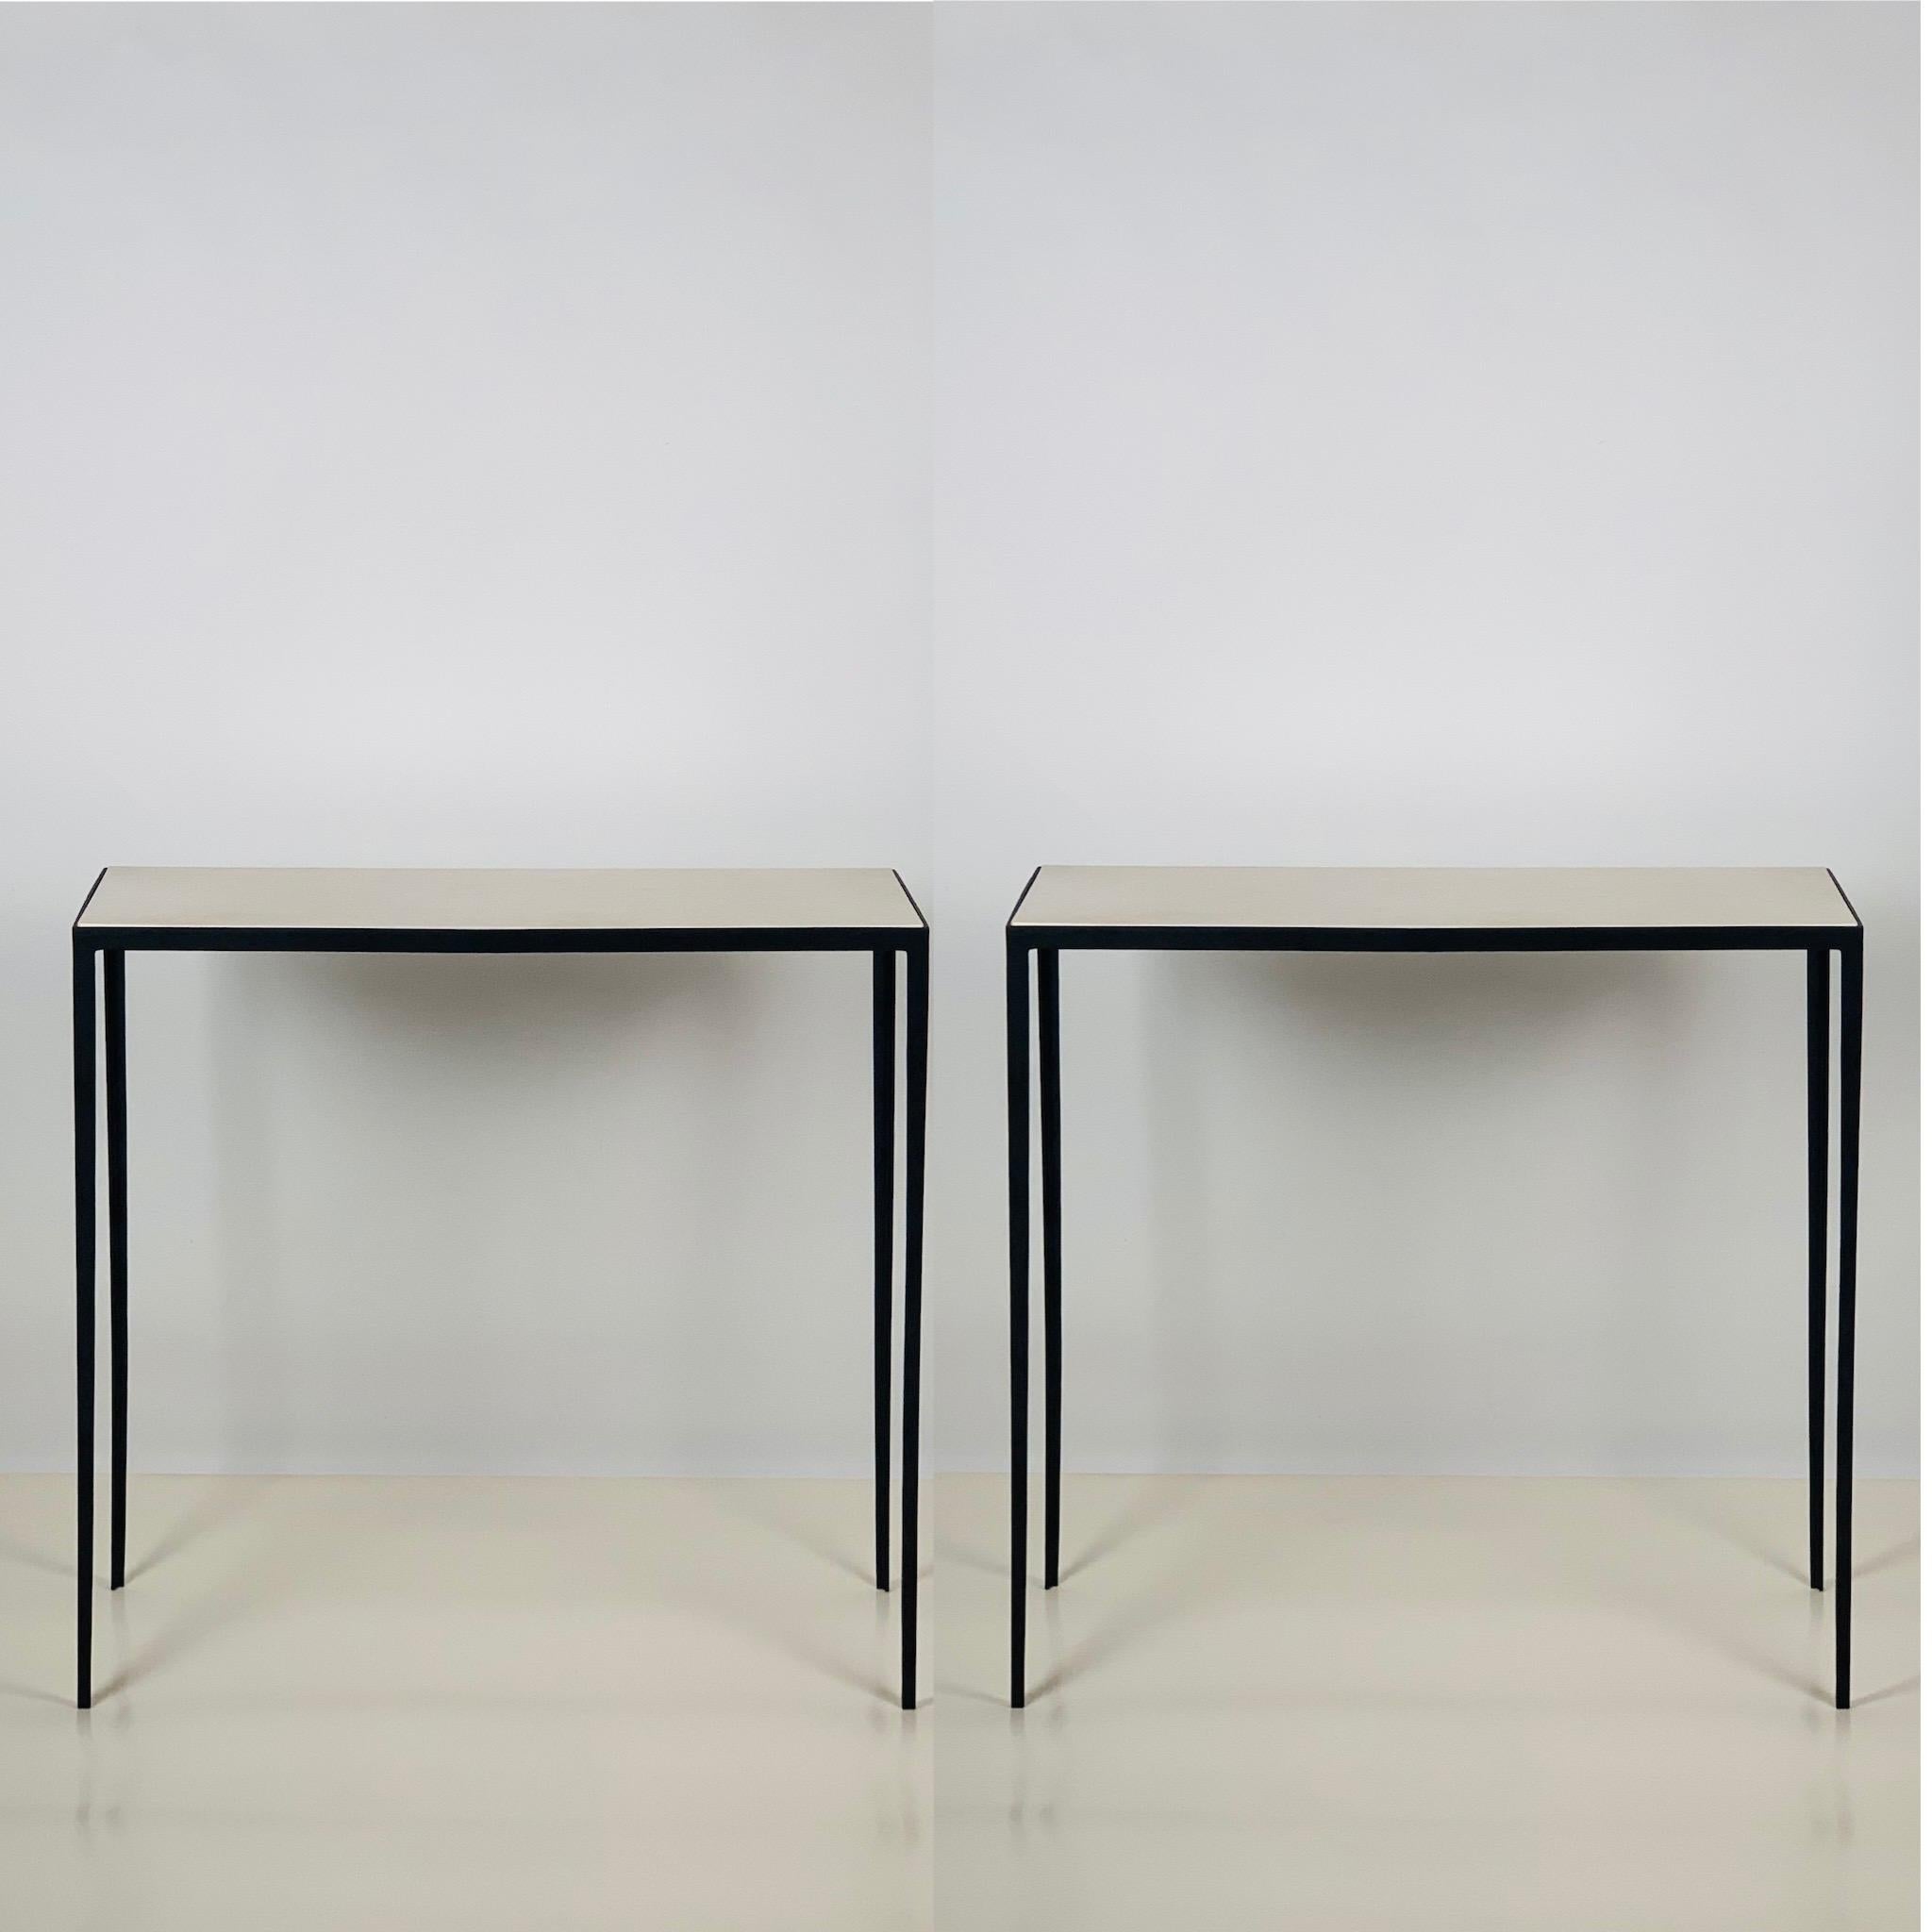 Contrasting grained cream parchment tops over slender blackened steel frames. Beautiful, simple, understated design.

Inspired by the timeless aesthetic of French modern design, these consoles from our exclusive Design Frères line are handmade in